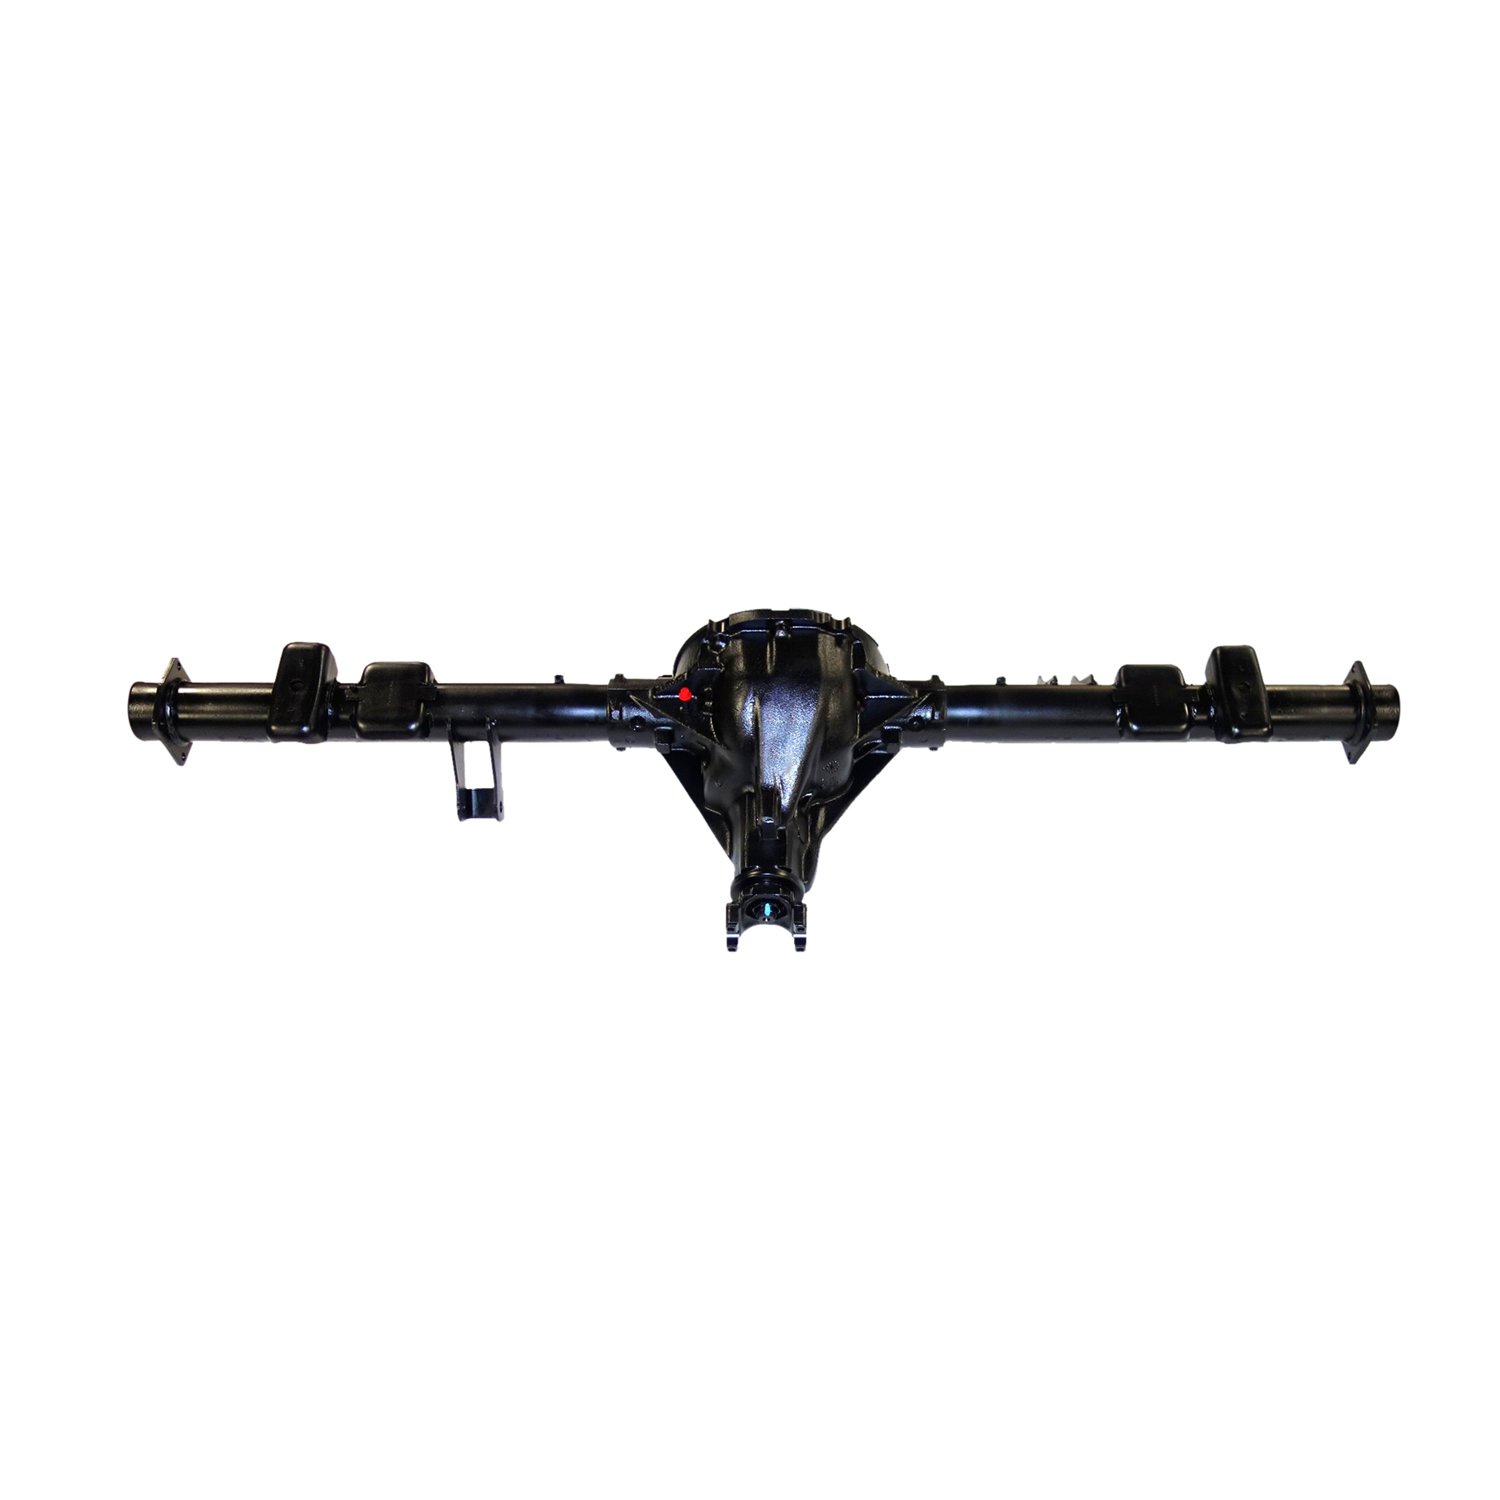 Remanufactured Complete Axle Assy for GM 8.5" 88-99 GMC 1500 Pickup 3.73 , 2wd, Posi LSD